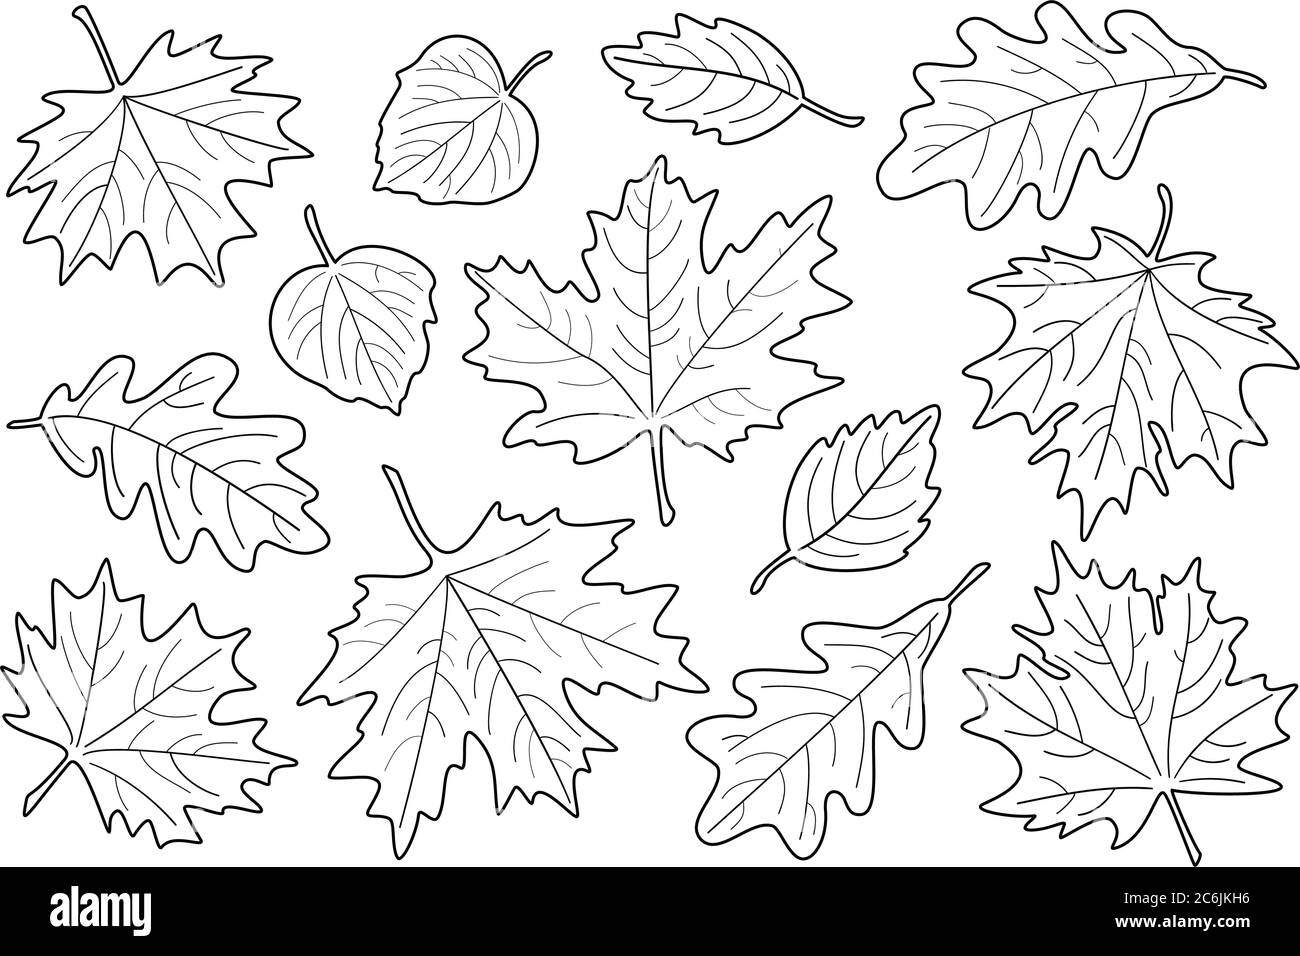 Vector illustration, set of black and white leaves. Fall leaves silhouettes. Maple, Linden, oak and birch leaves. Stock Vector